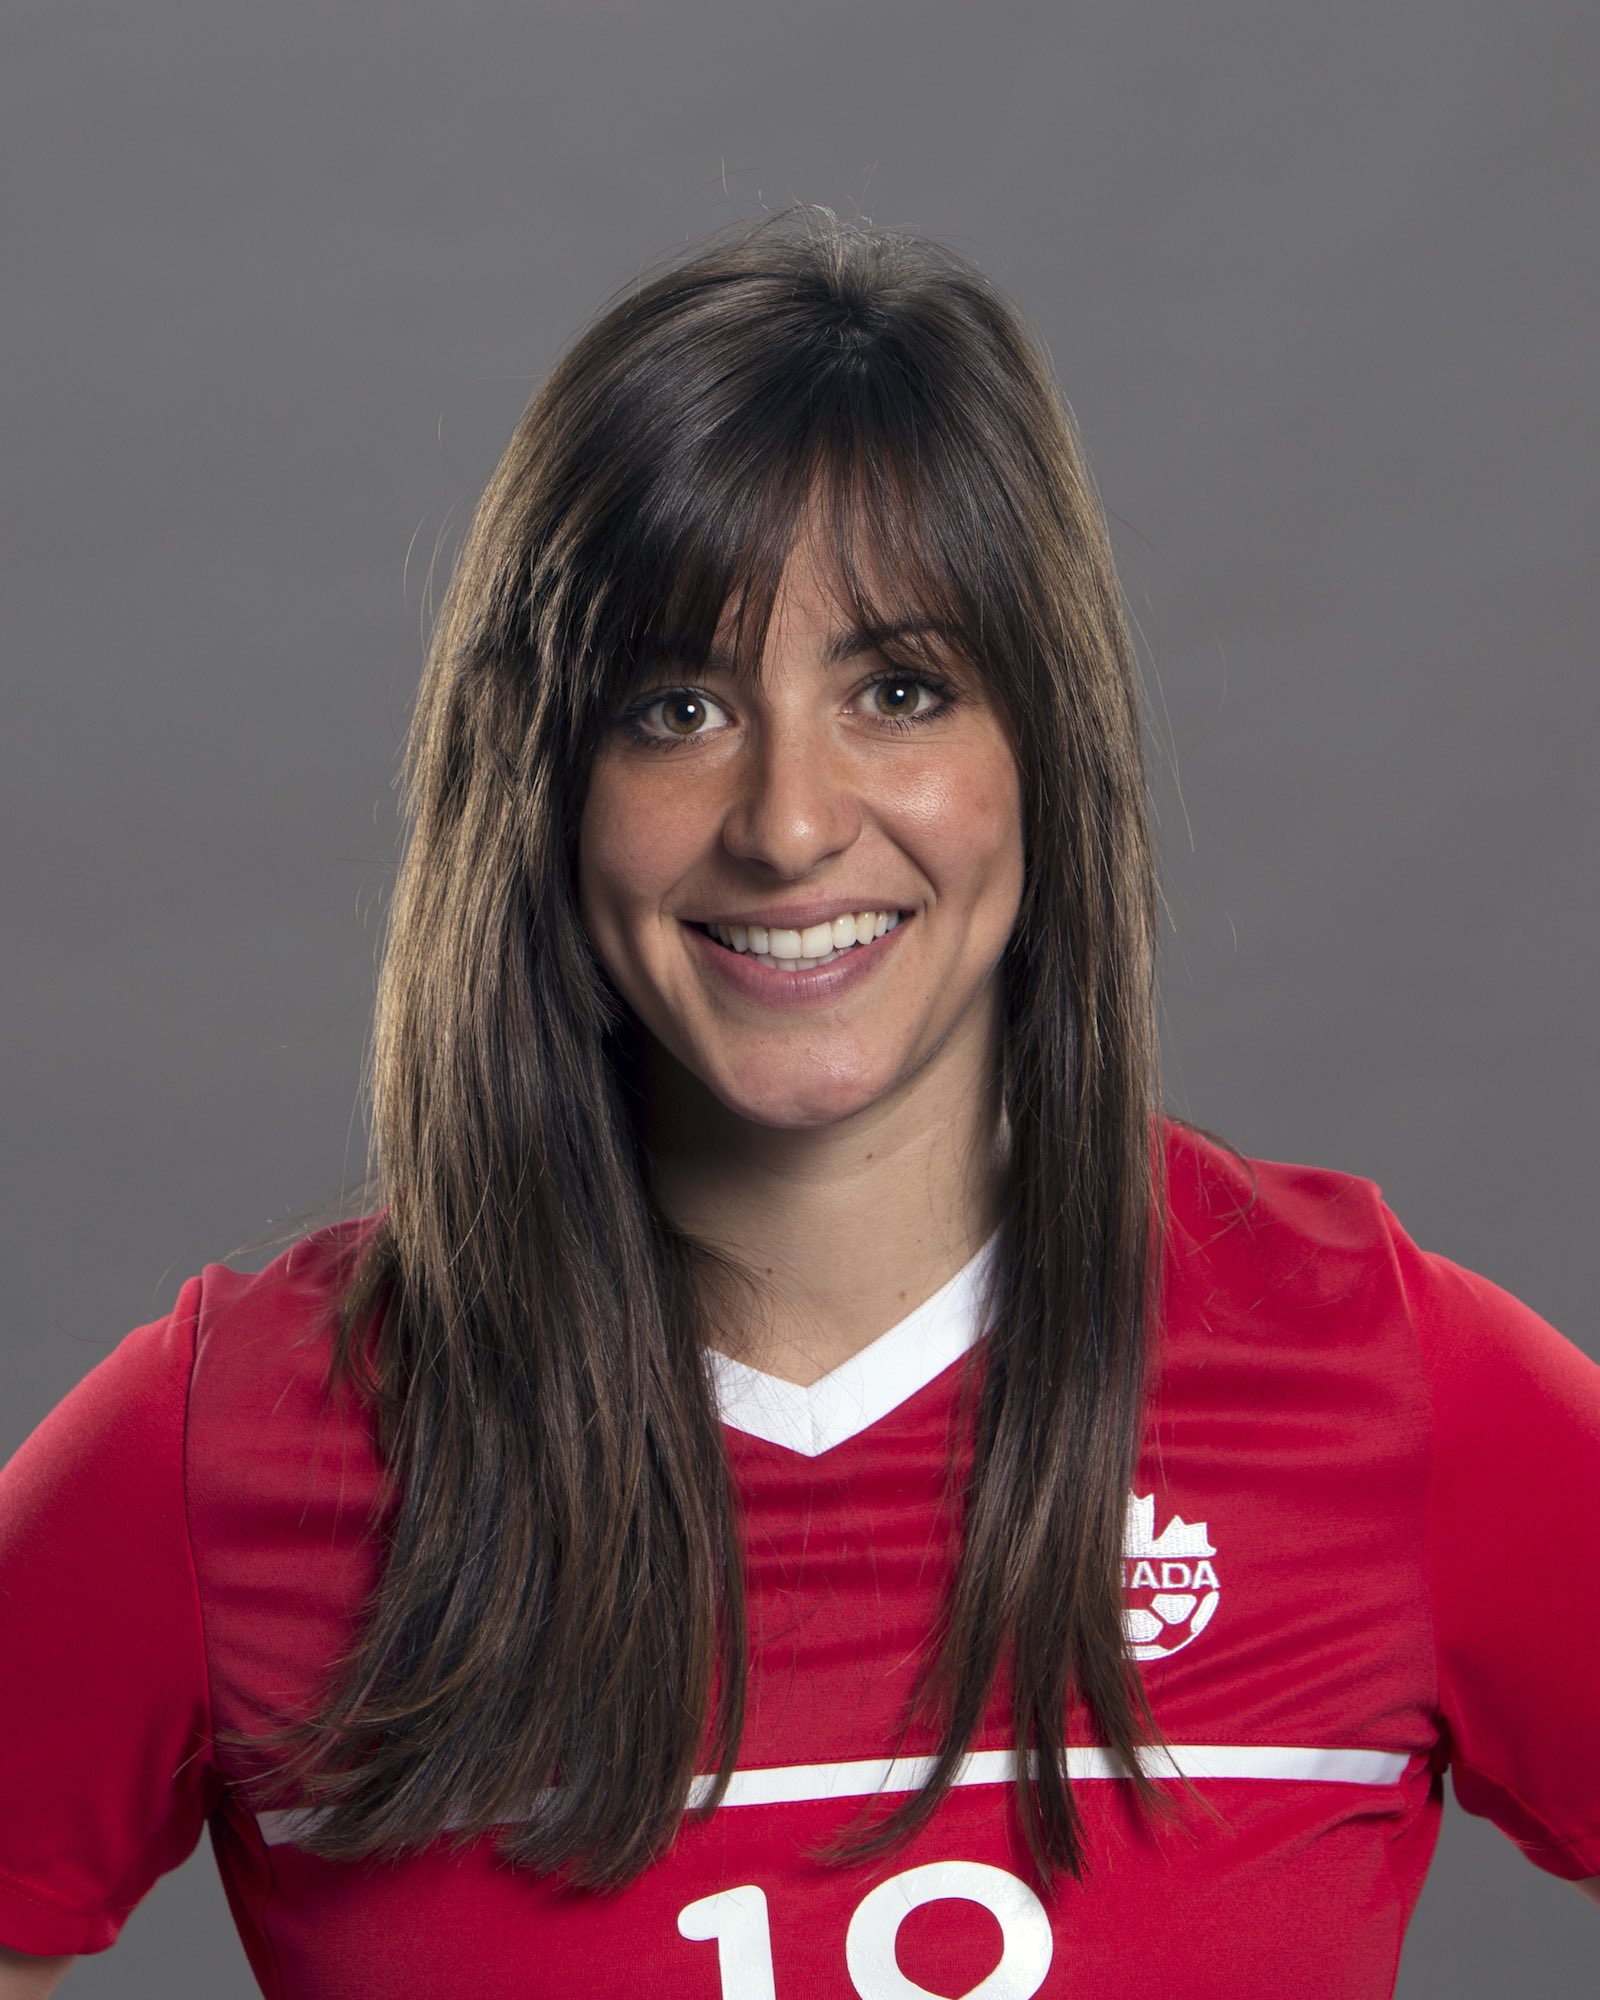 40 Most Stunning Soccer Players Of The Fifa Women S World Cup Selenia Iacchelli Canada